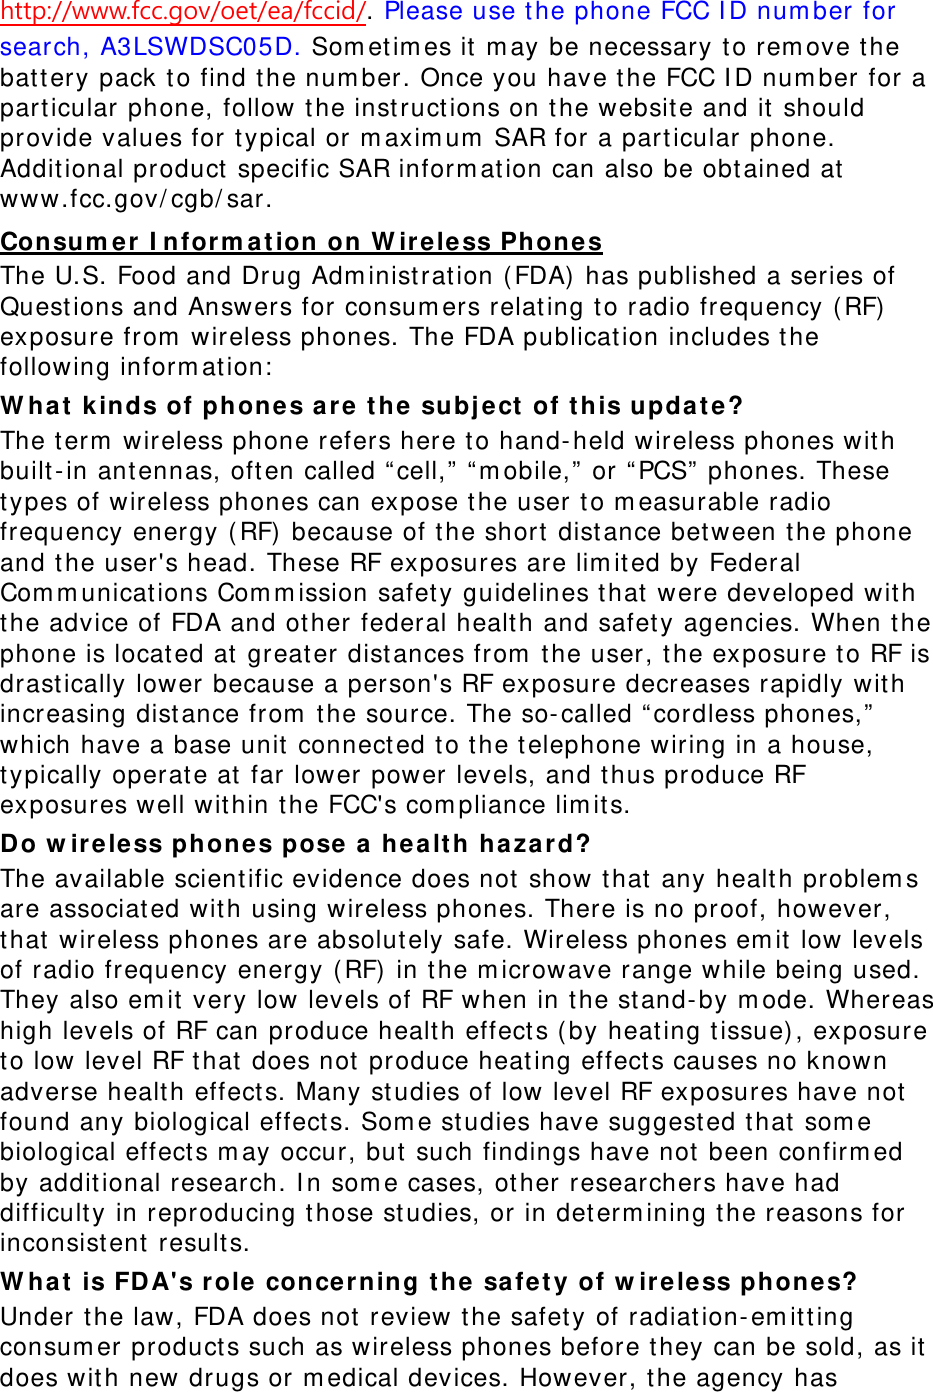 http://www.fcc.gov/oet/ea/fccid/. Please use the phone FCC ID number for search, A3LSWDSC05D. Sometimes it may be necessary to remove the battery pack to find the number. Once you have the FCC ID number for a particular phone, follow the instructions on the website and it should provide values for typical or maximum SAR for a particular phone. Additional product specific SAR information can also be obtained at www.fcc.gov/cgb/sar. Consumer Information on Wireless Phones The U.S. Food and Drug Administration (FDA) has published a series of Questions and Answers for consumers relating to radio frequency (RF) exposure from wireless phones. The FDA publication includes the following information: What kinds of phones are the subject of this update? The term wireless phone refers here to hand-held wireless phones with built-in antennas, often called “cell,” “mobile,” or “PCS” phones. These types of wireless phones can expose the user to measurable radio frequency energy (RF) because of the short distance between the phone and the user&apos;s head. These RF exposures are limited by Federal Communications Commission safety guidelines that were developed with the advice of FDA and other federal health and safety agencies. When the phone is located at greater distances from the user, the exposure to RF is drastically lower because a person&apos;s RF exposure decreases rapidly with increasing distance from the source. The so-called “cordless phones,” which have a base unit connected to the telephone wiring in a house, typically operate at far lower power levels, and thus produce RF exposures well within the FCC&apos;s compliance limits. Do wireless phones pose a health hazard? The available scientific evidence does not show that any health problems are associated with using wireless phones. There is no proof, however, that wireless phones are absolutely safe. Wireless phones emit low levels of radio frequency energy (RF) in the microwave range while being used. They also emit very low levels of RF when in the stand-by mode. Whereas high levels of RF can produce health effects (by heating tissue), exposure to low level RF that does not produce heating effects causes no known adverse health effects. Many studies of low level RF exposures have not found any biological effects. Some studies have suggested that some biological effects may occur, but such findings have not been confirmed by additional research. In some cases, other researchers have had difficulty in reproducing those studies, or in determining the reasons for inconsistent results. What is FDA&apos;s role concerning the safety of wireless phones? Under the law, FDA does not review the safety of radiation-emitting consumer products such as wireless phones before they can be sold, as it does with new drugs or medical devices. However, the agency has 